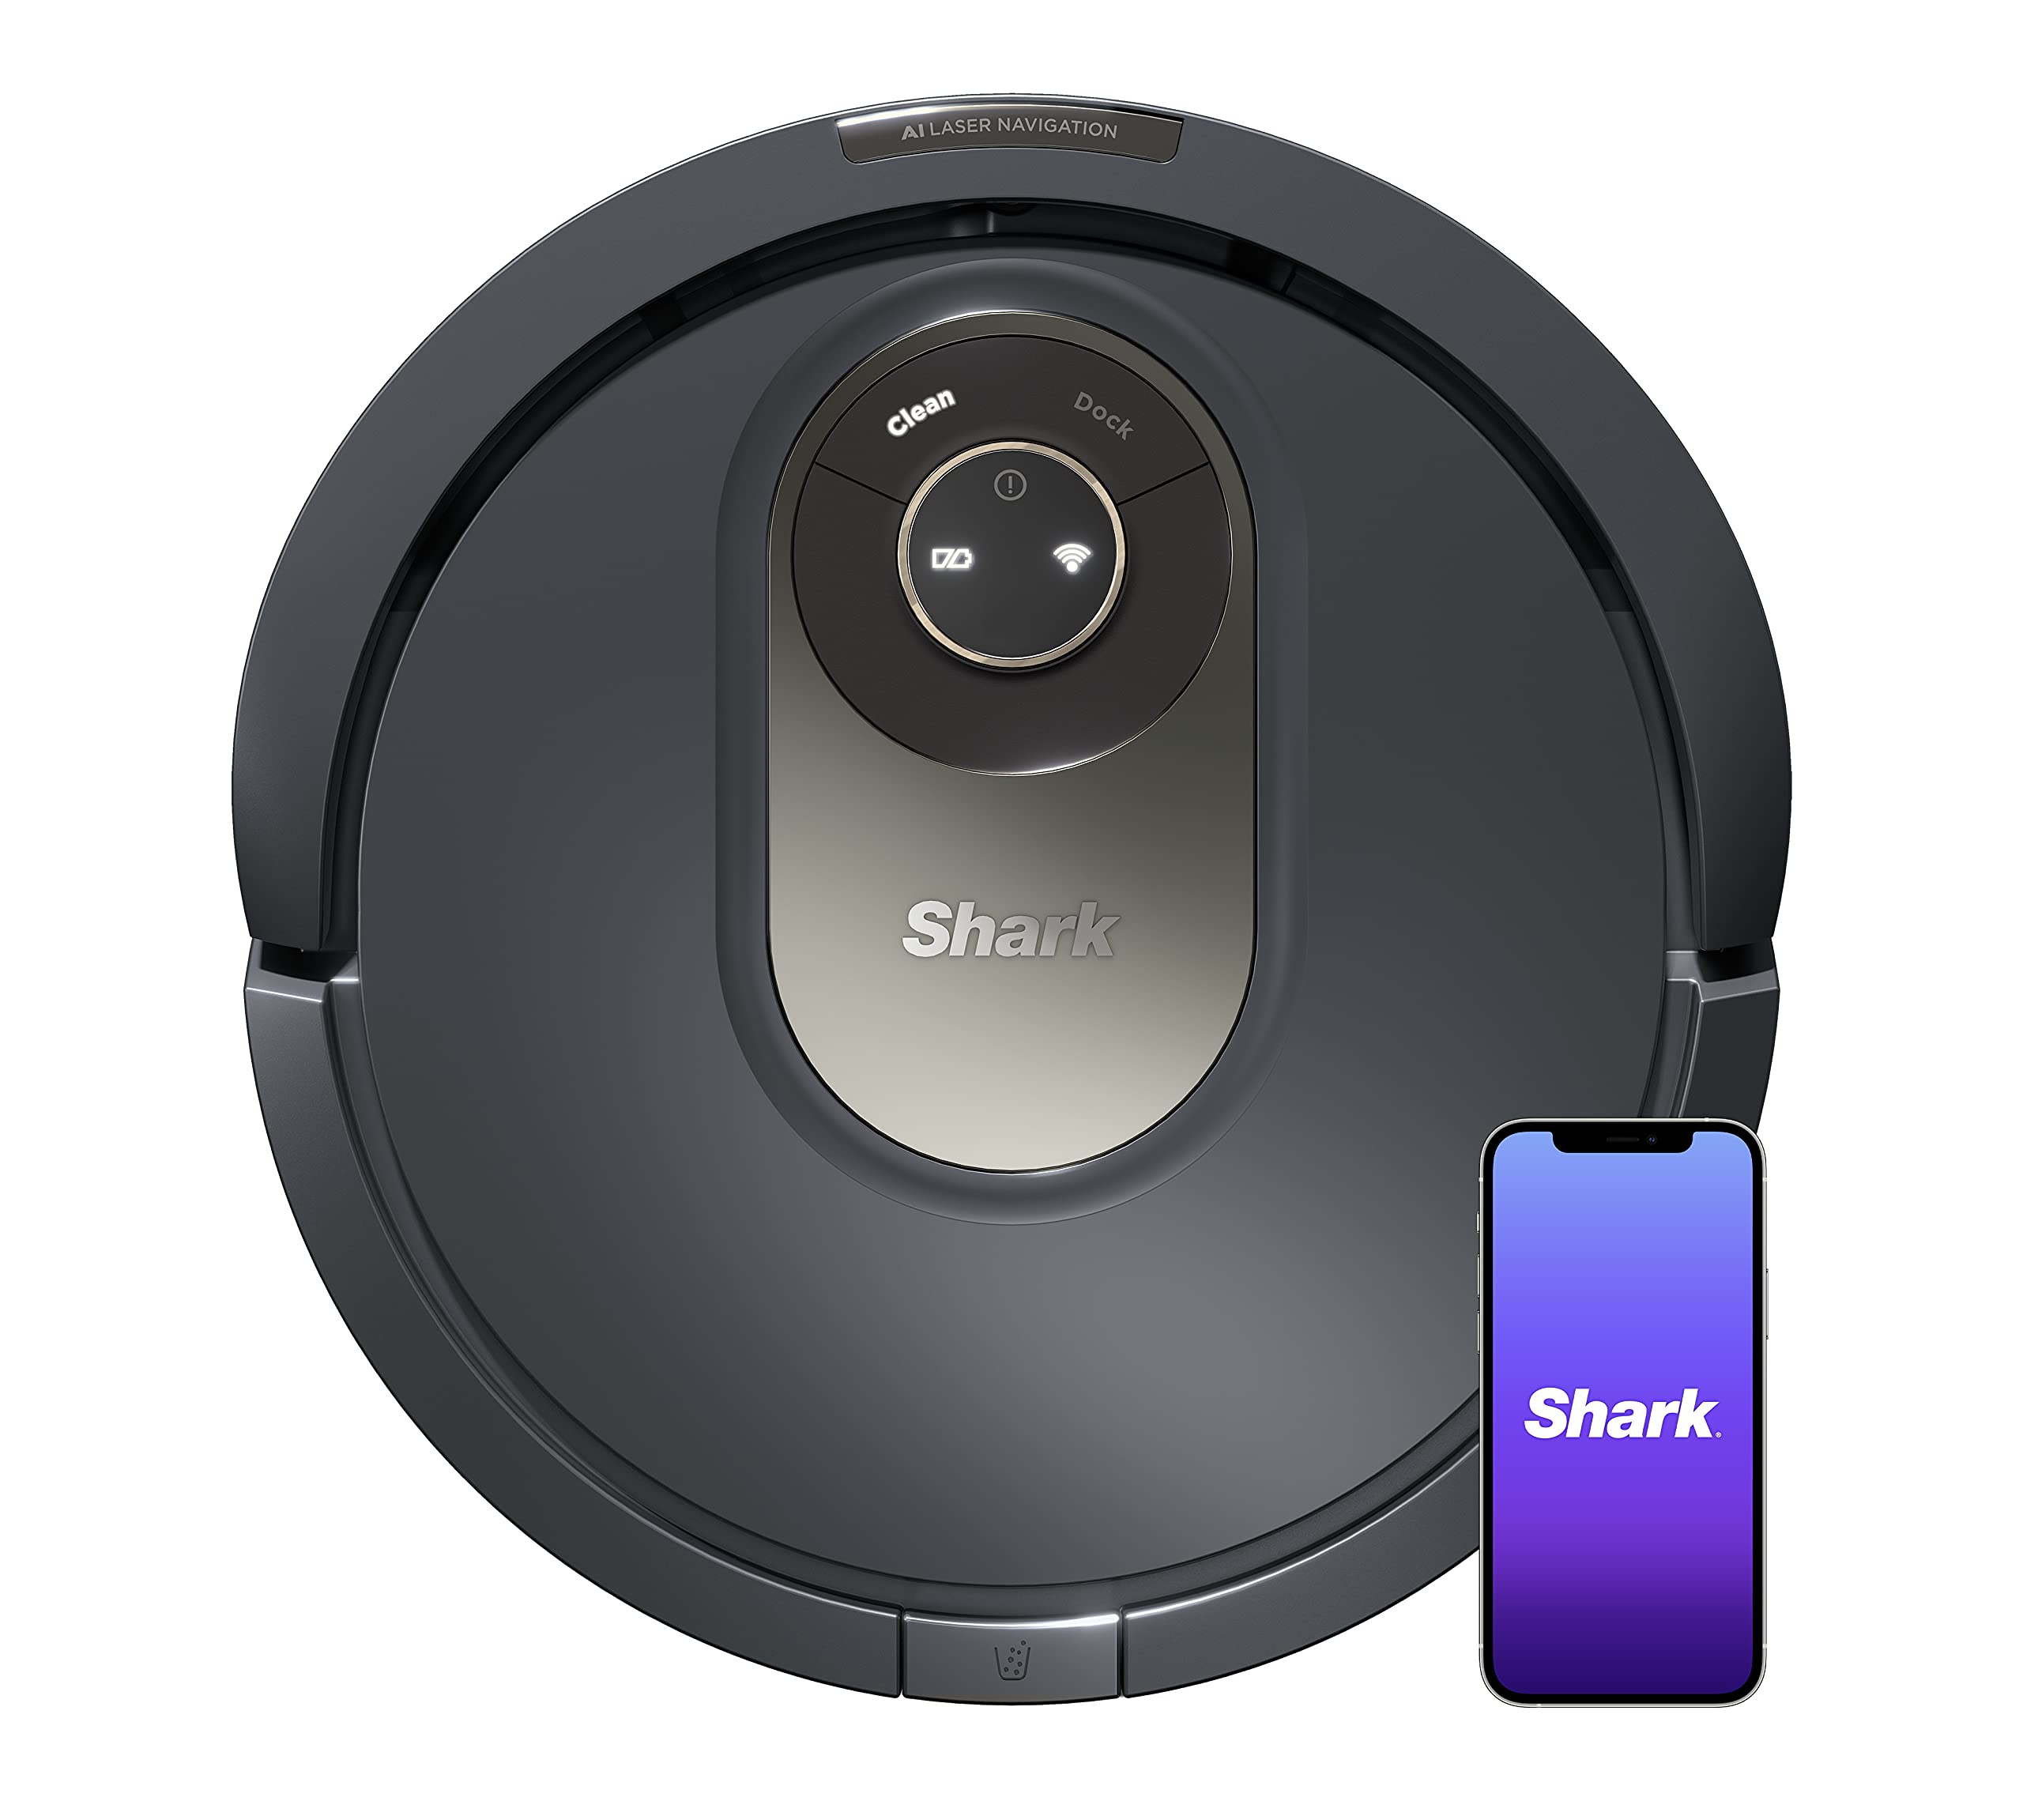 Shark AV2001 AI Robot Vacuum with Self-Cleaning Brushroll, Object Detection, Advanced Navigation, Home Mapping, Perfect for Pet Hair, Compatible with Alexa, Gray  - Like New